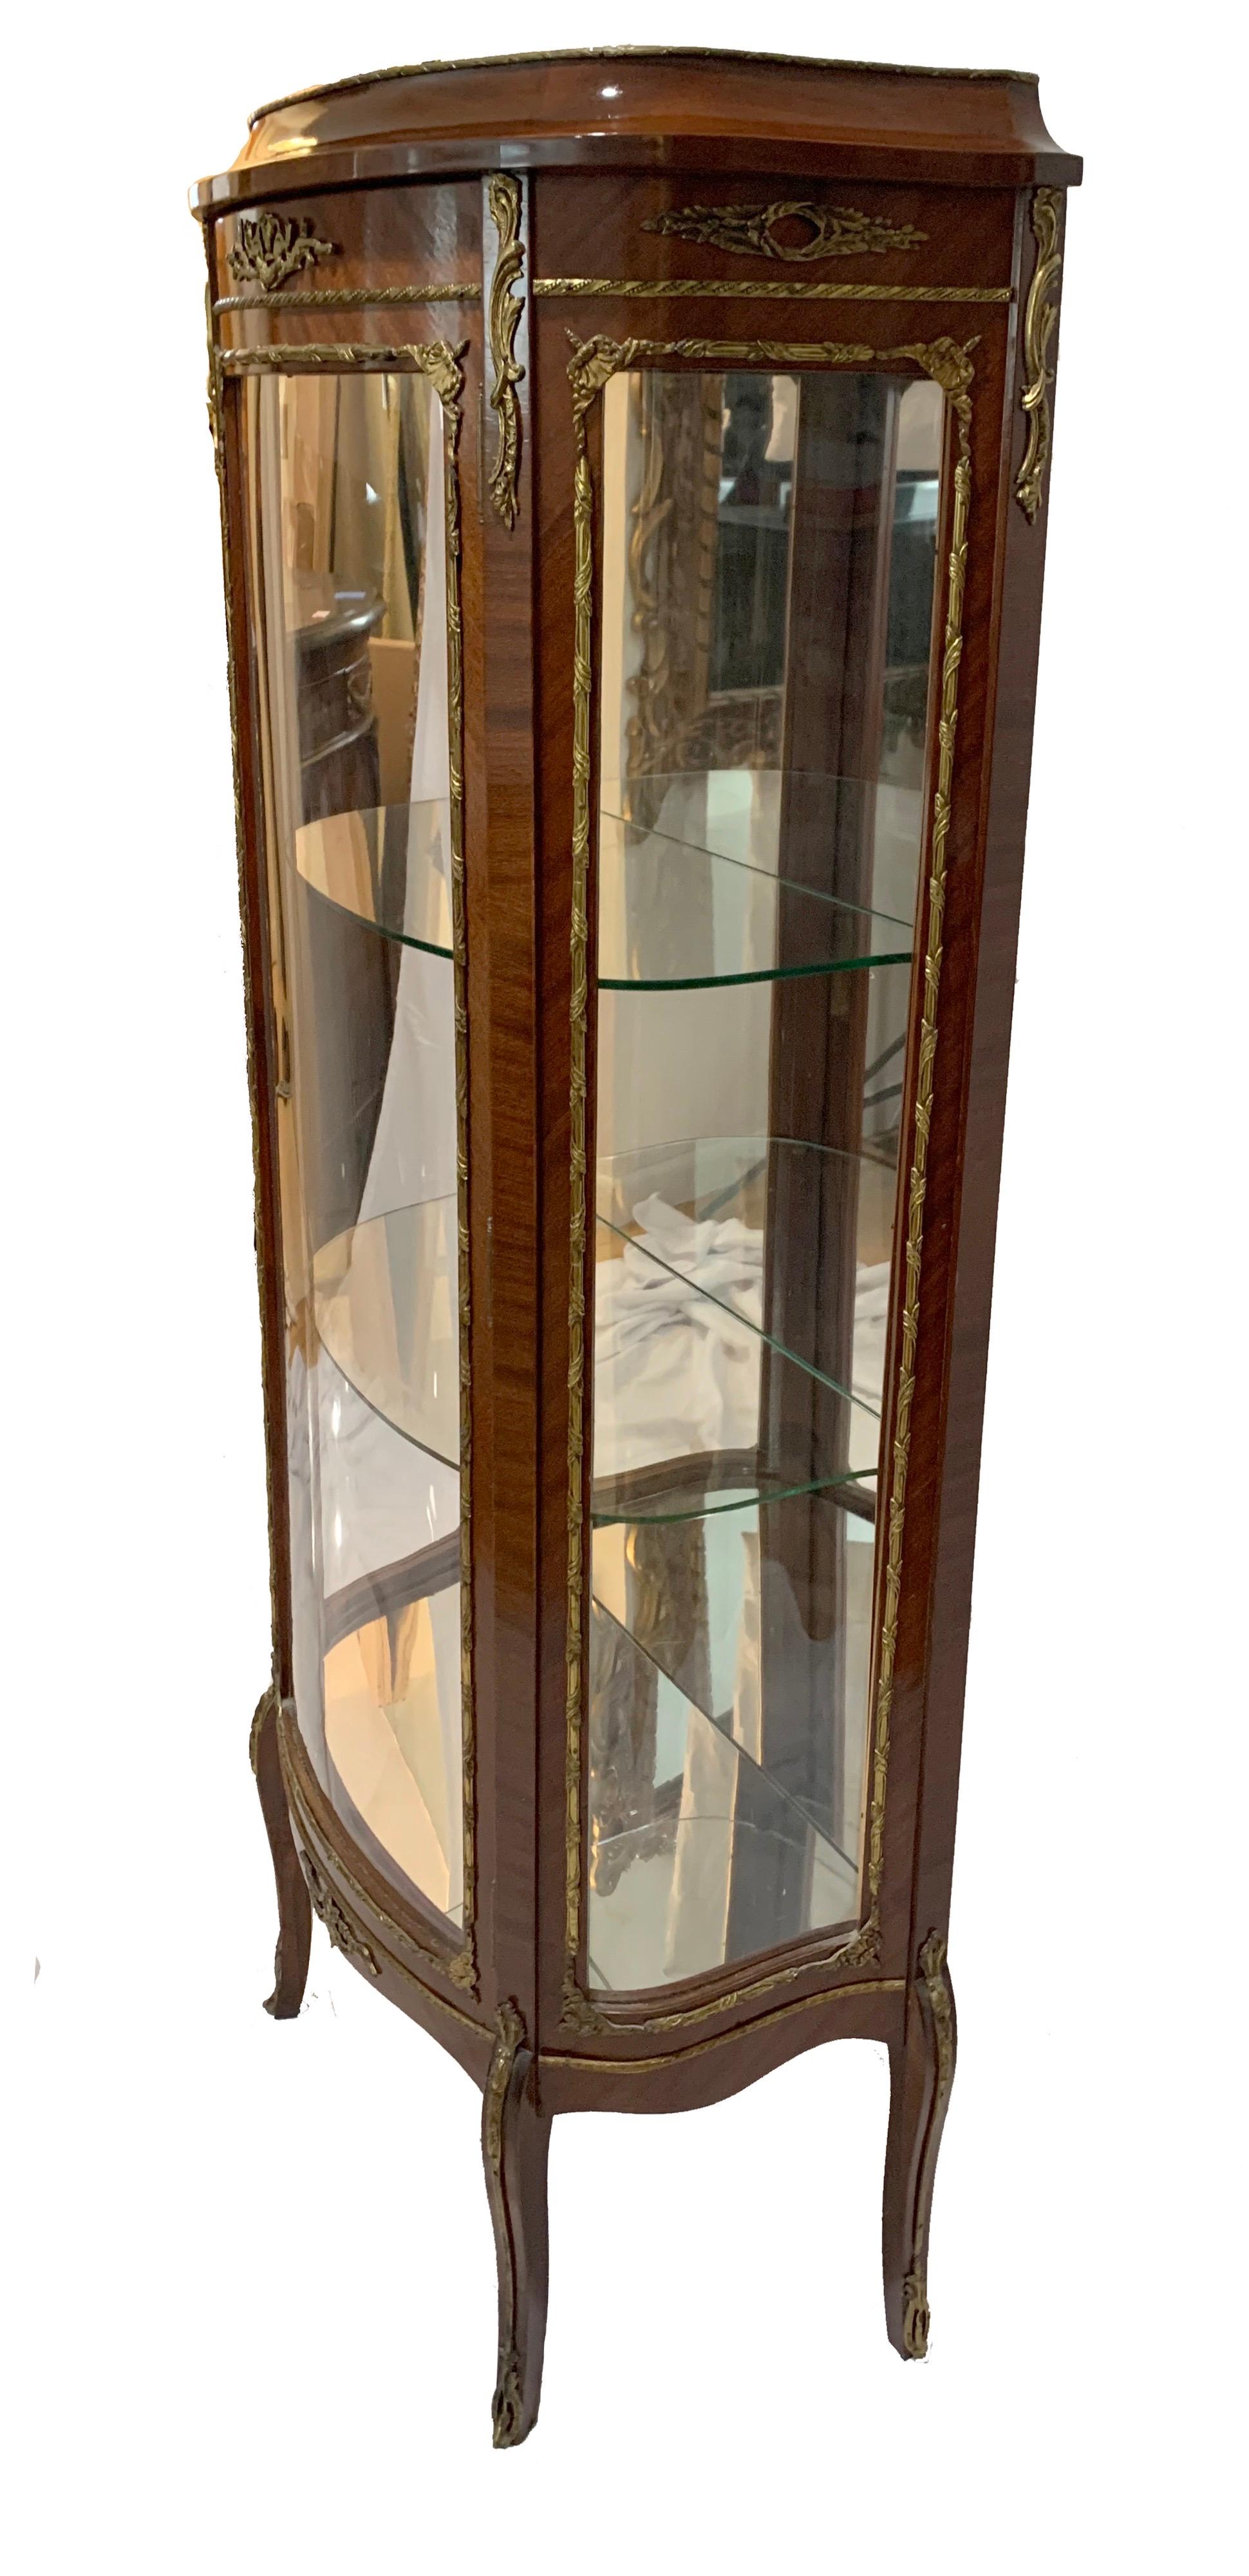 Exquisite French Louis XV display curio cabinet features intricate gilt bronze detail, three glass panels, mirrored glass interior backing, two curved glass shelves, curved single swing door and elegant French form.